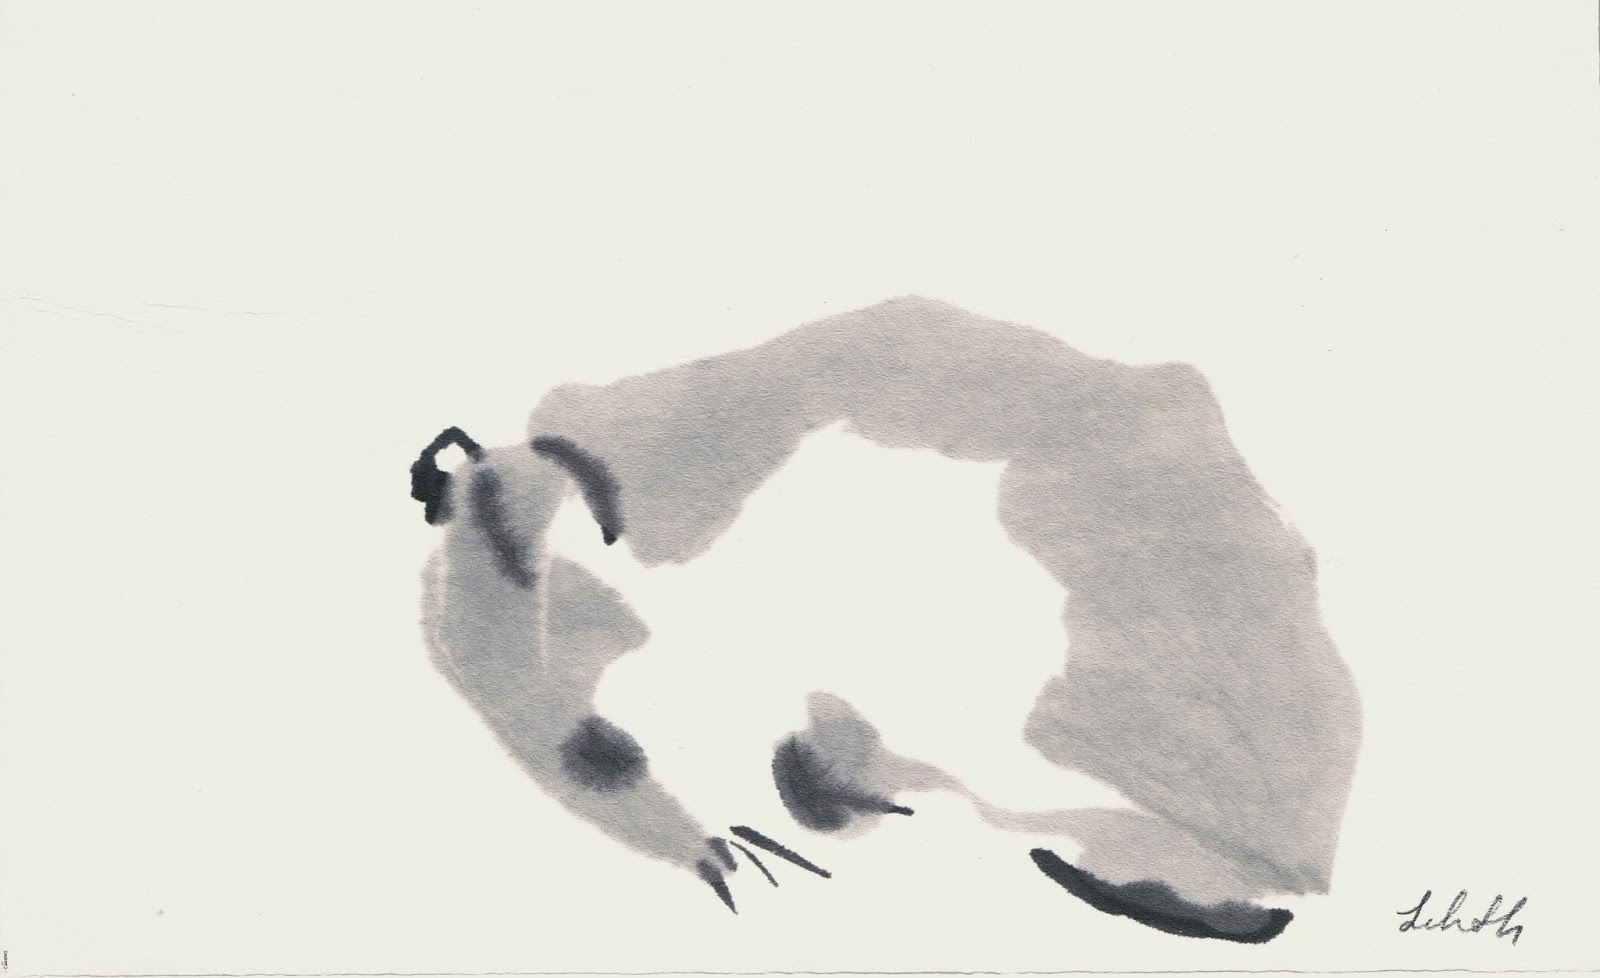 A Sumi-e painting of a small rodent used to illustrate the theme of simplicity.